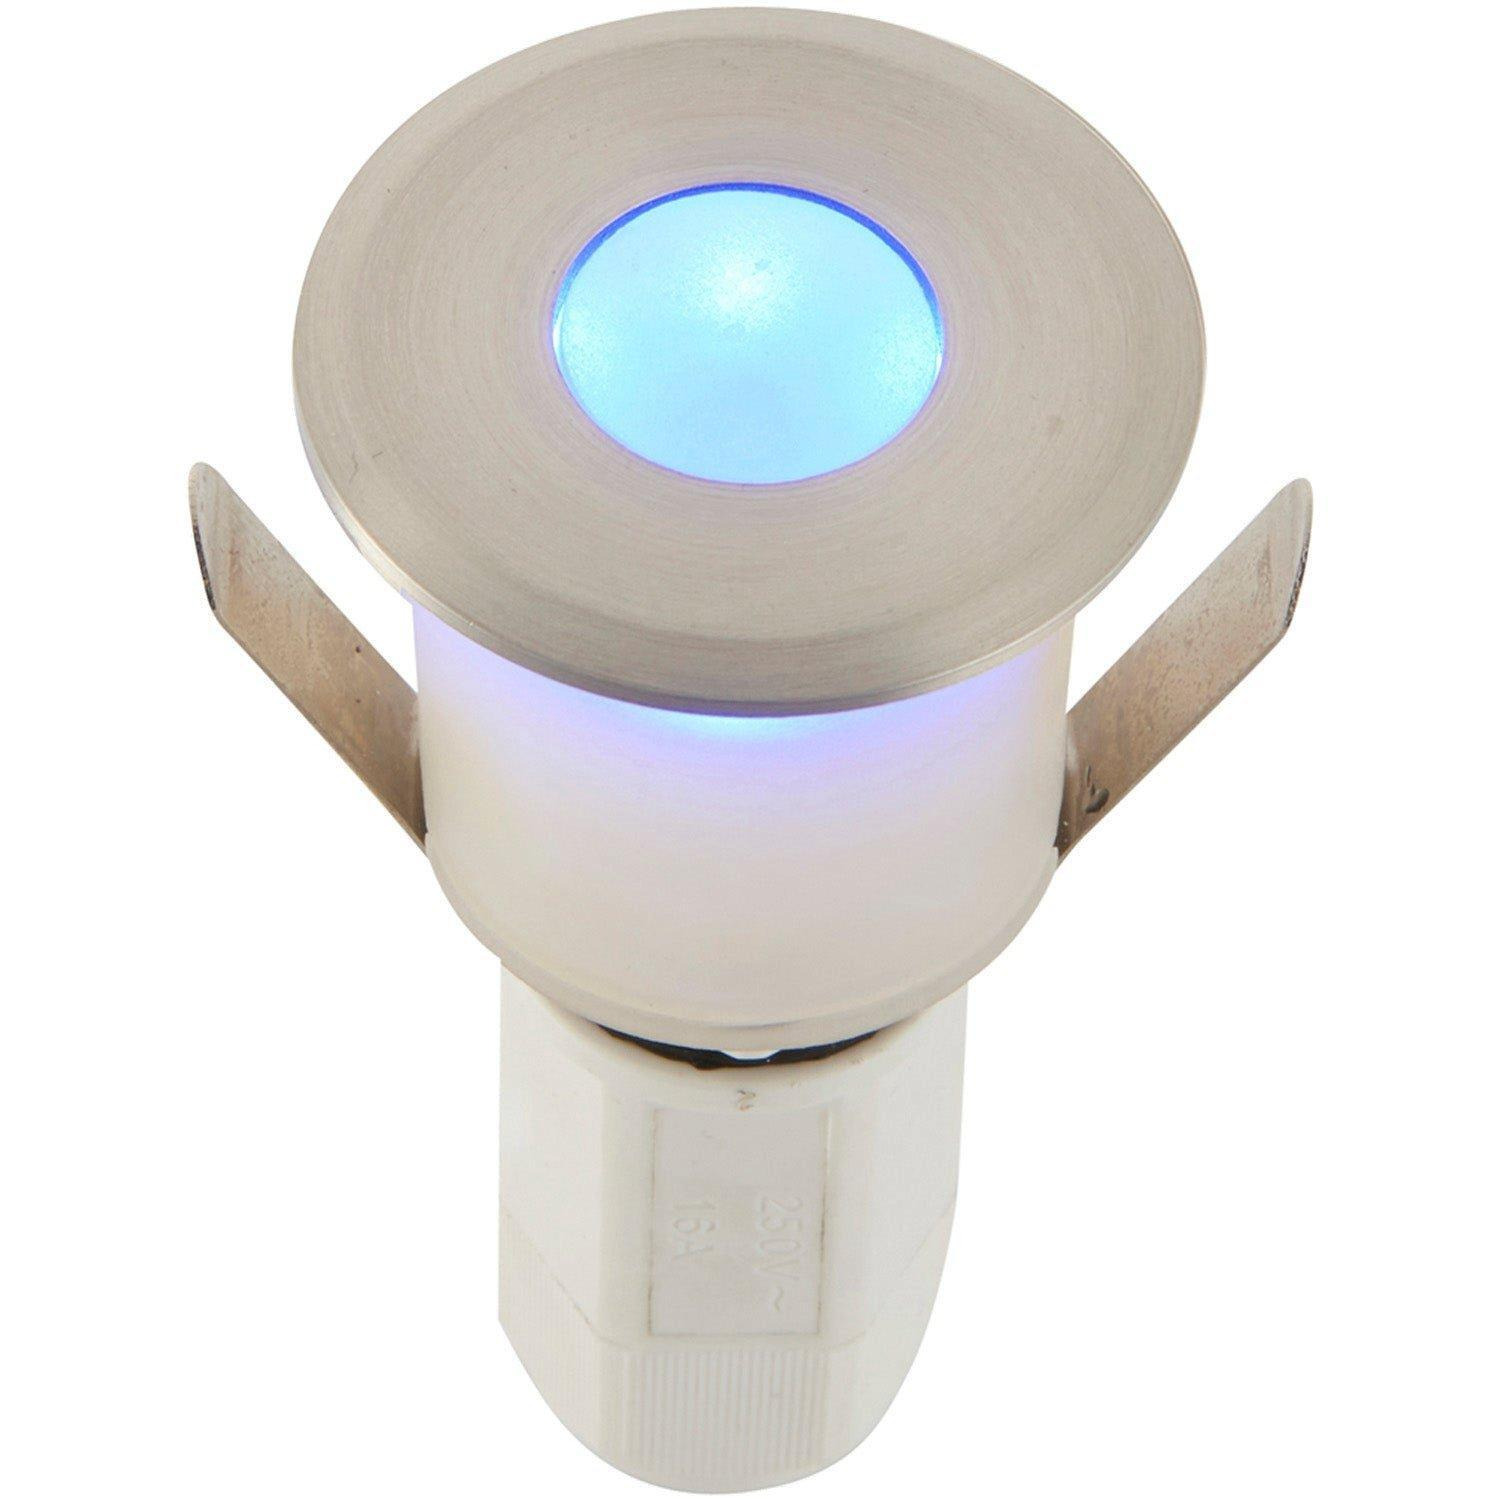 Recessed Decking IP67 Guide Light - 1.2W Blue Light LED - Satin Nickel Plate - image 1